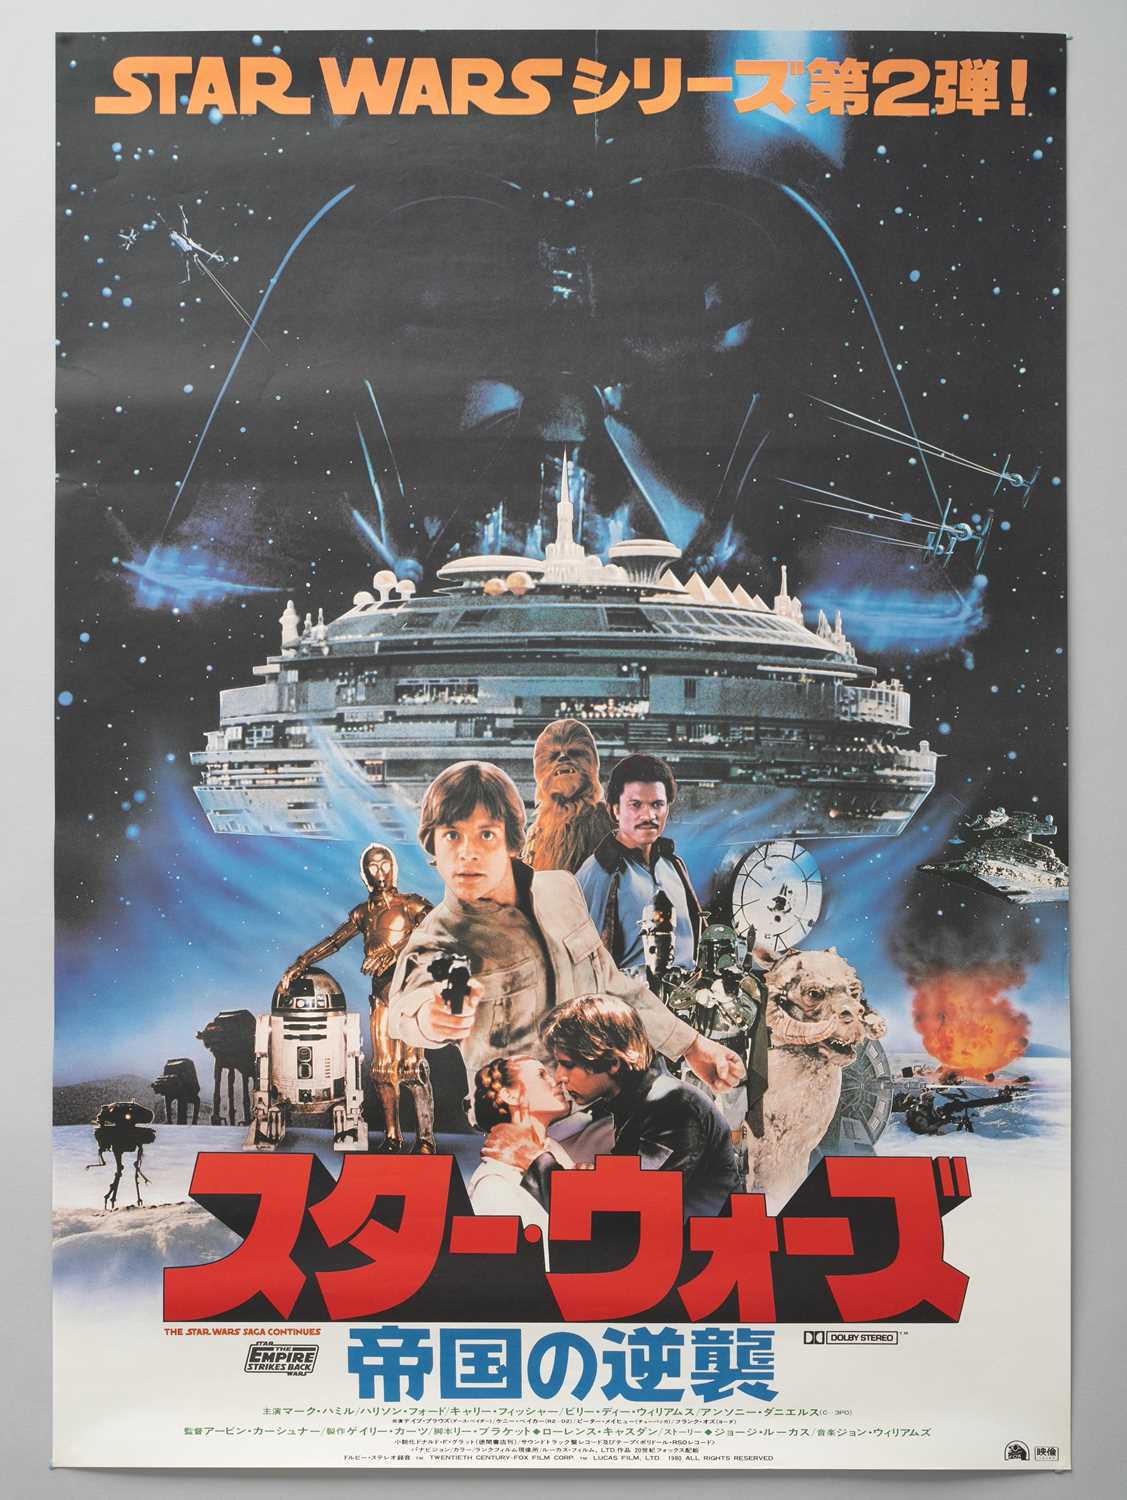 NO RESERVE A JAPANESE STAR WARS POSTER SHOWA ERA, 1980 Featuring artwork made from photographs of